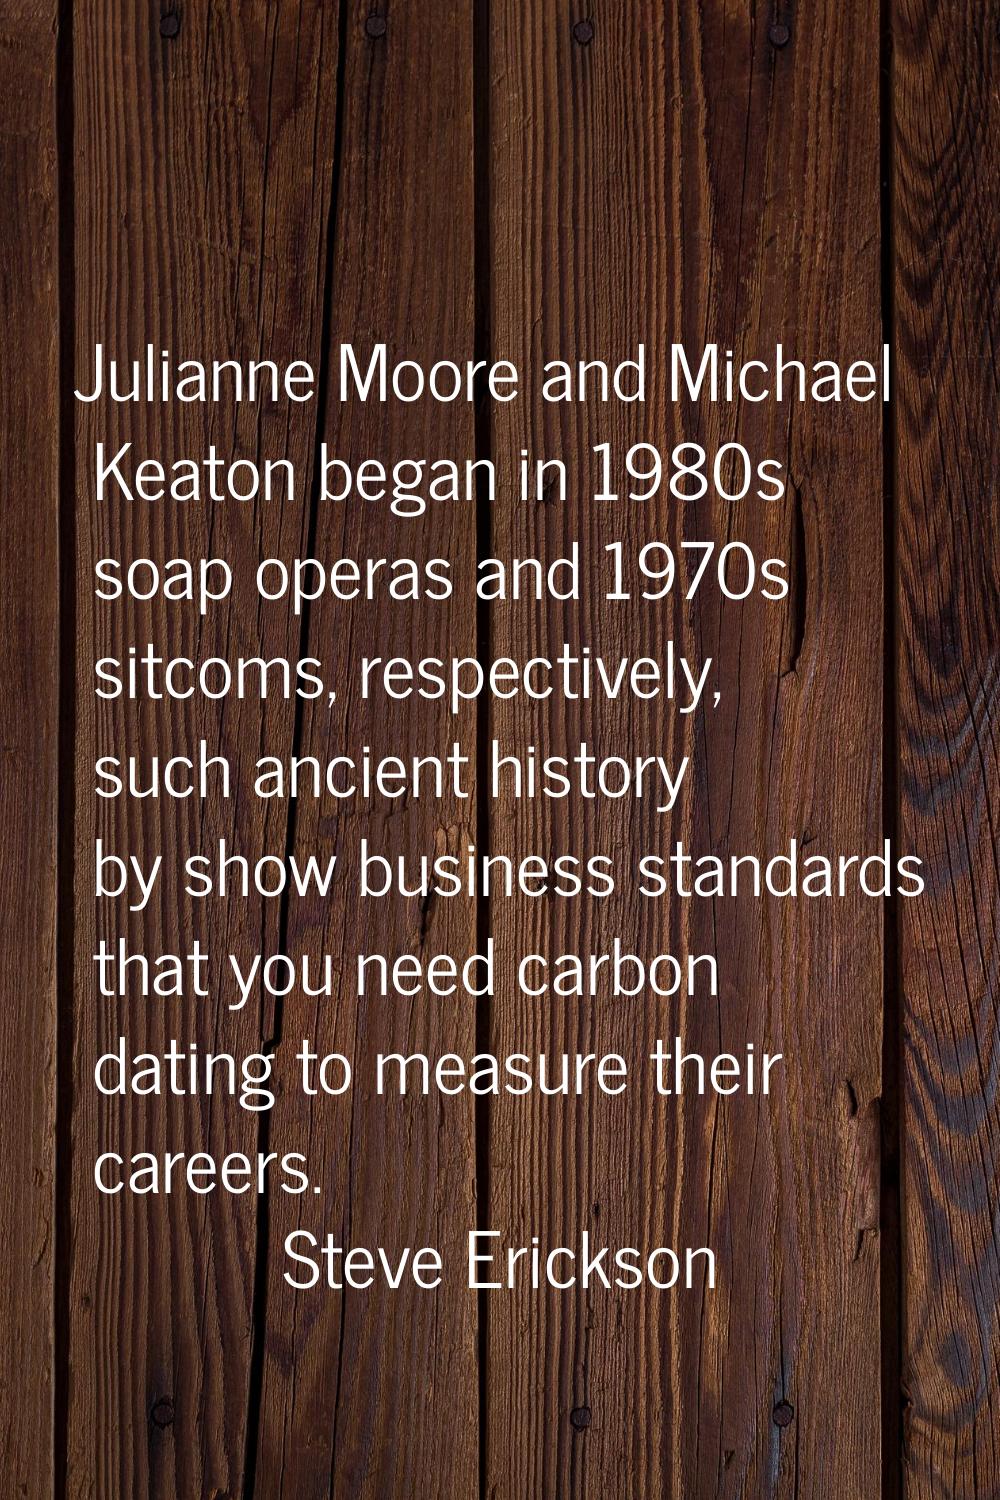 Julianne Moore and Michael Keaton began in 1980s soap operas and 1970s sitcoms, respectively, such 